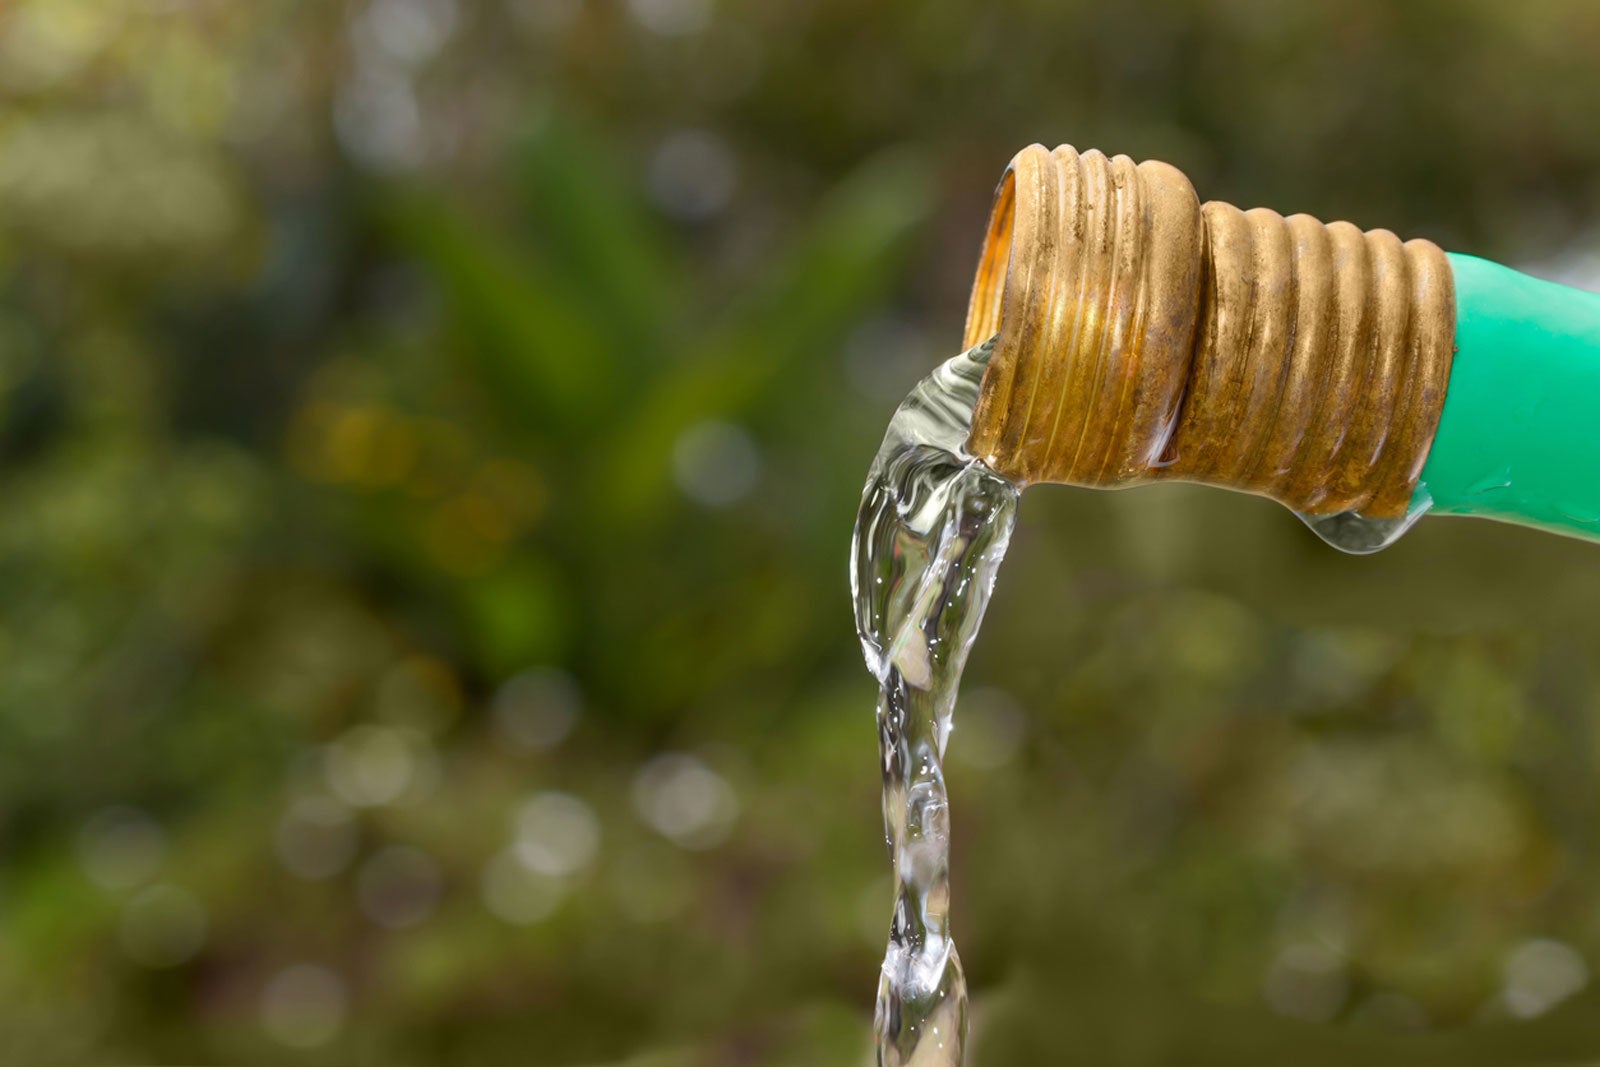 Here's why you should never drink water from a garden hose